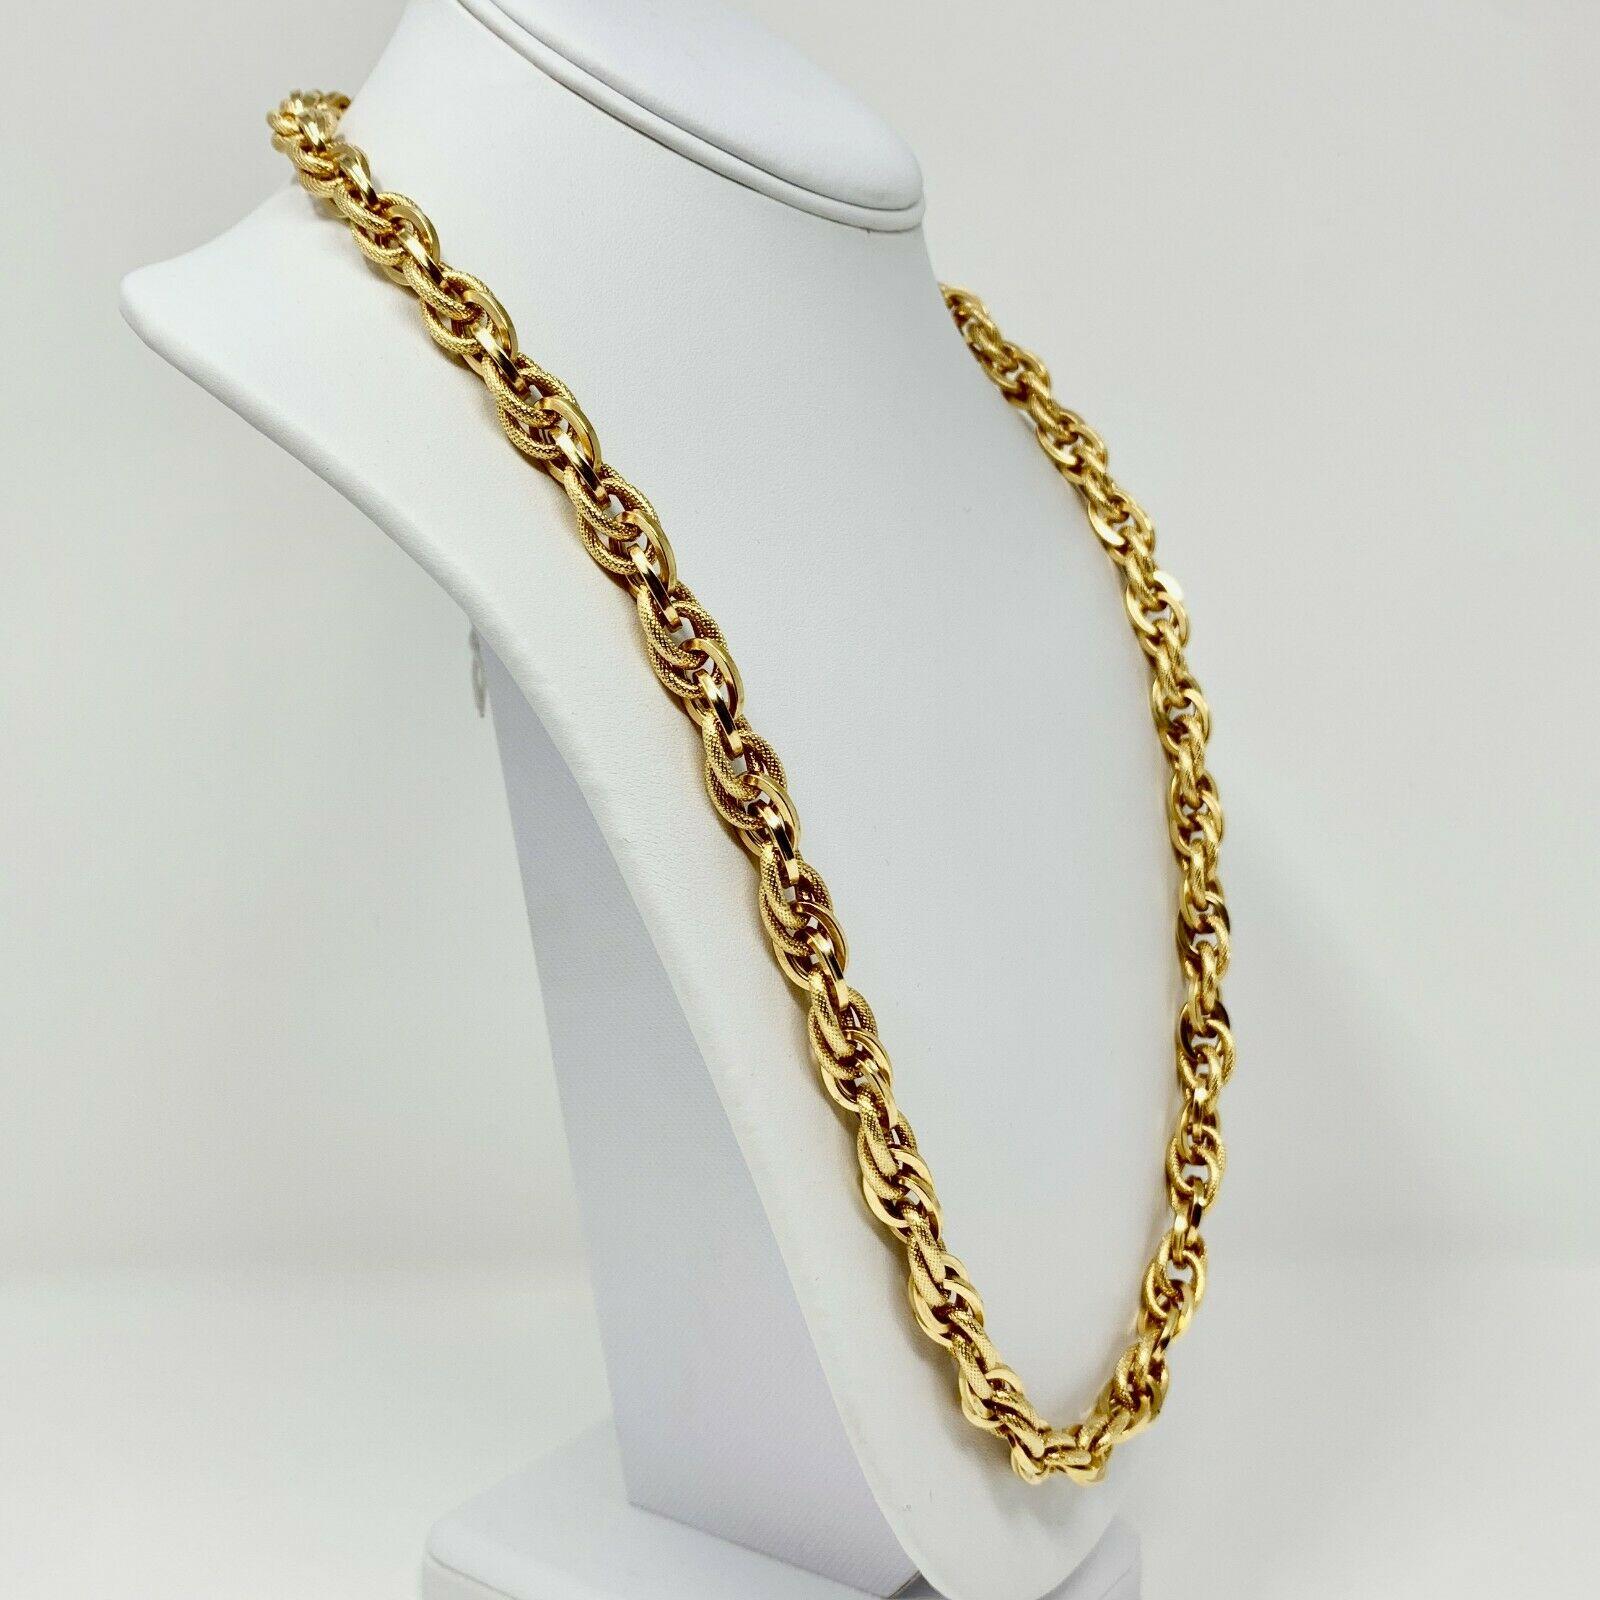 14k Yellow Gold 46.7g Fancy Polished Textured Oval Cable Link Chain Necklace 26